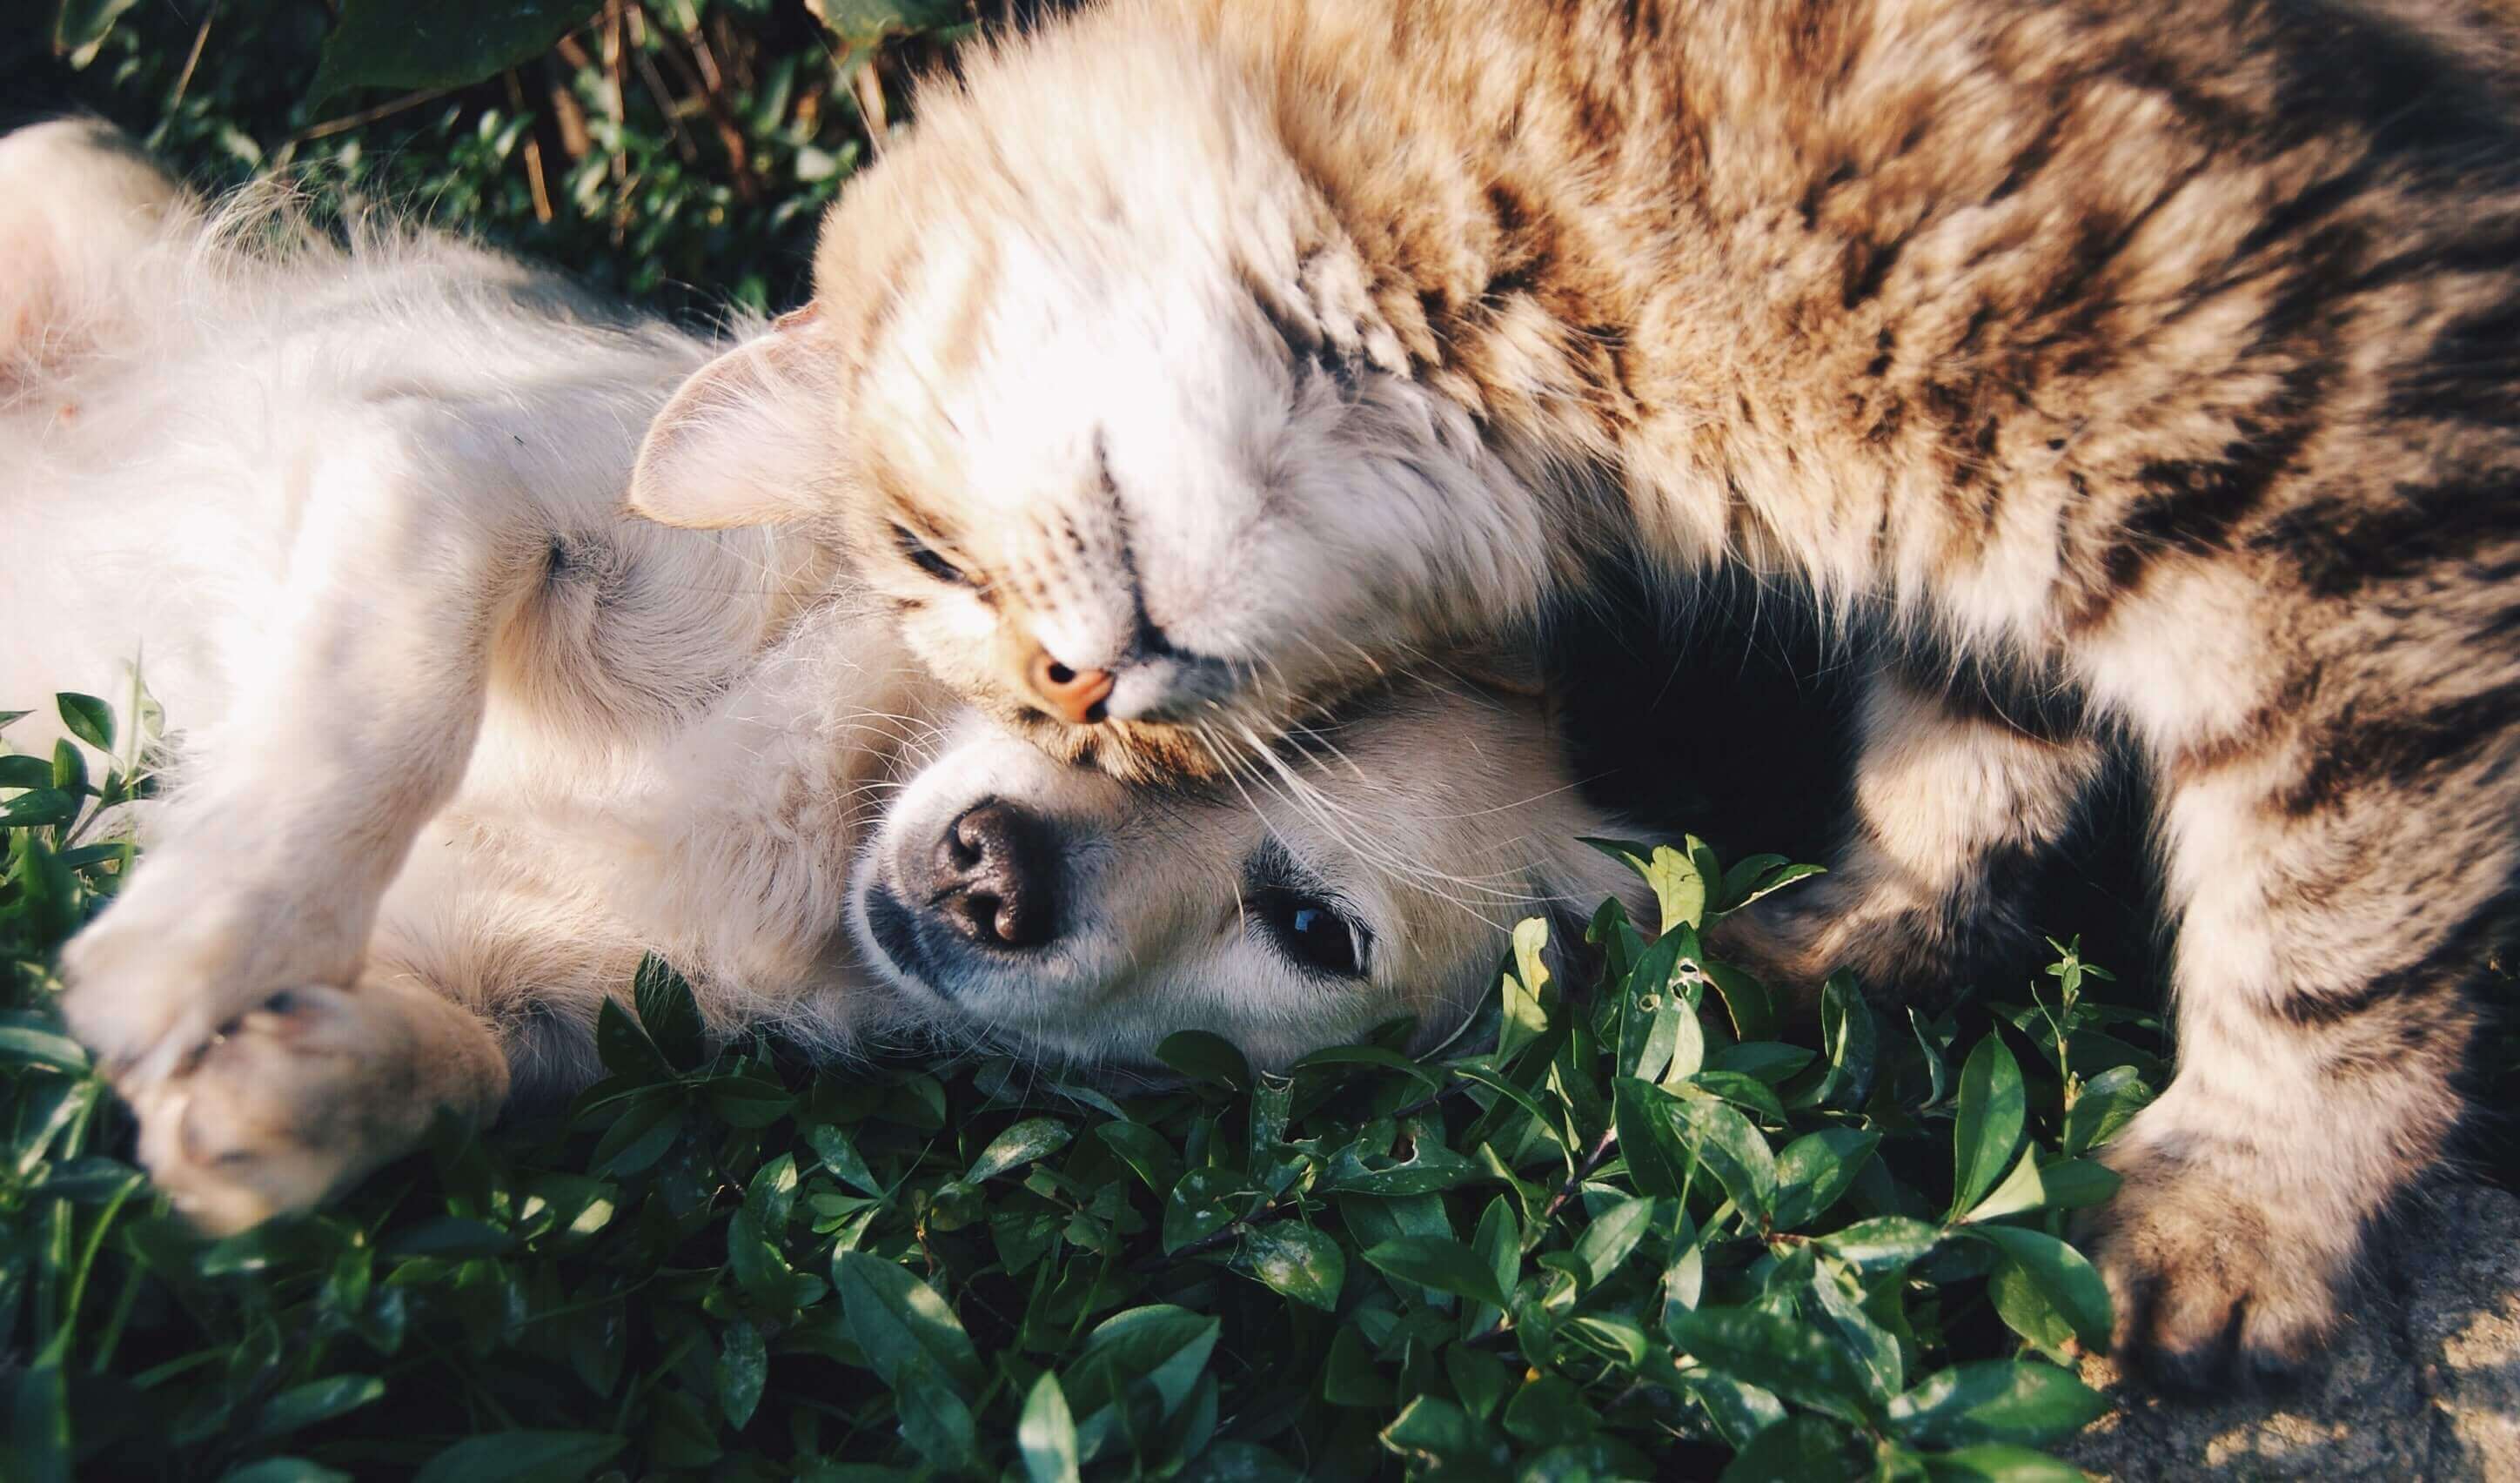 Dog and cat lying together on the grass